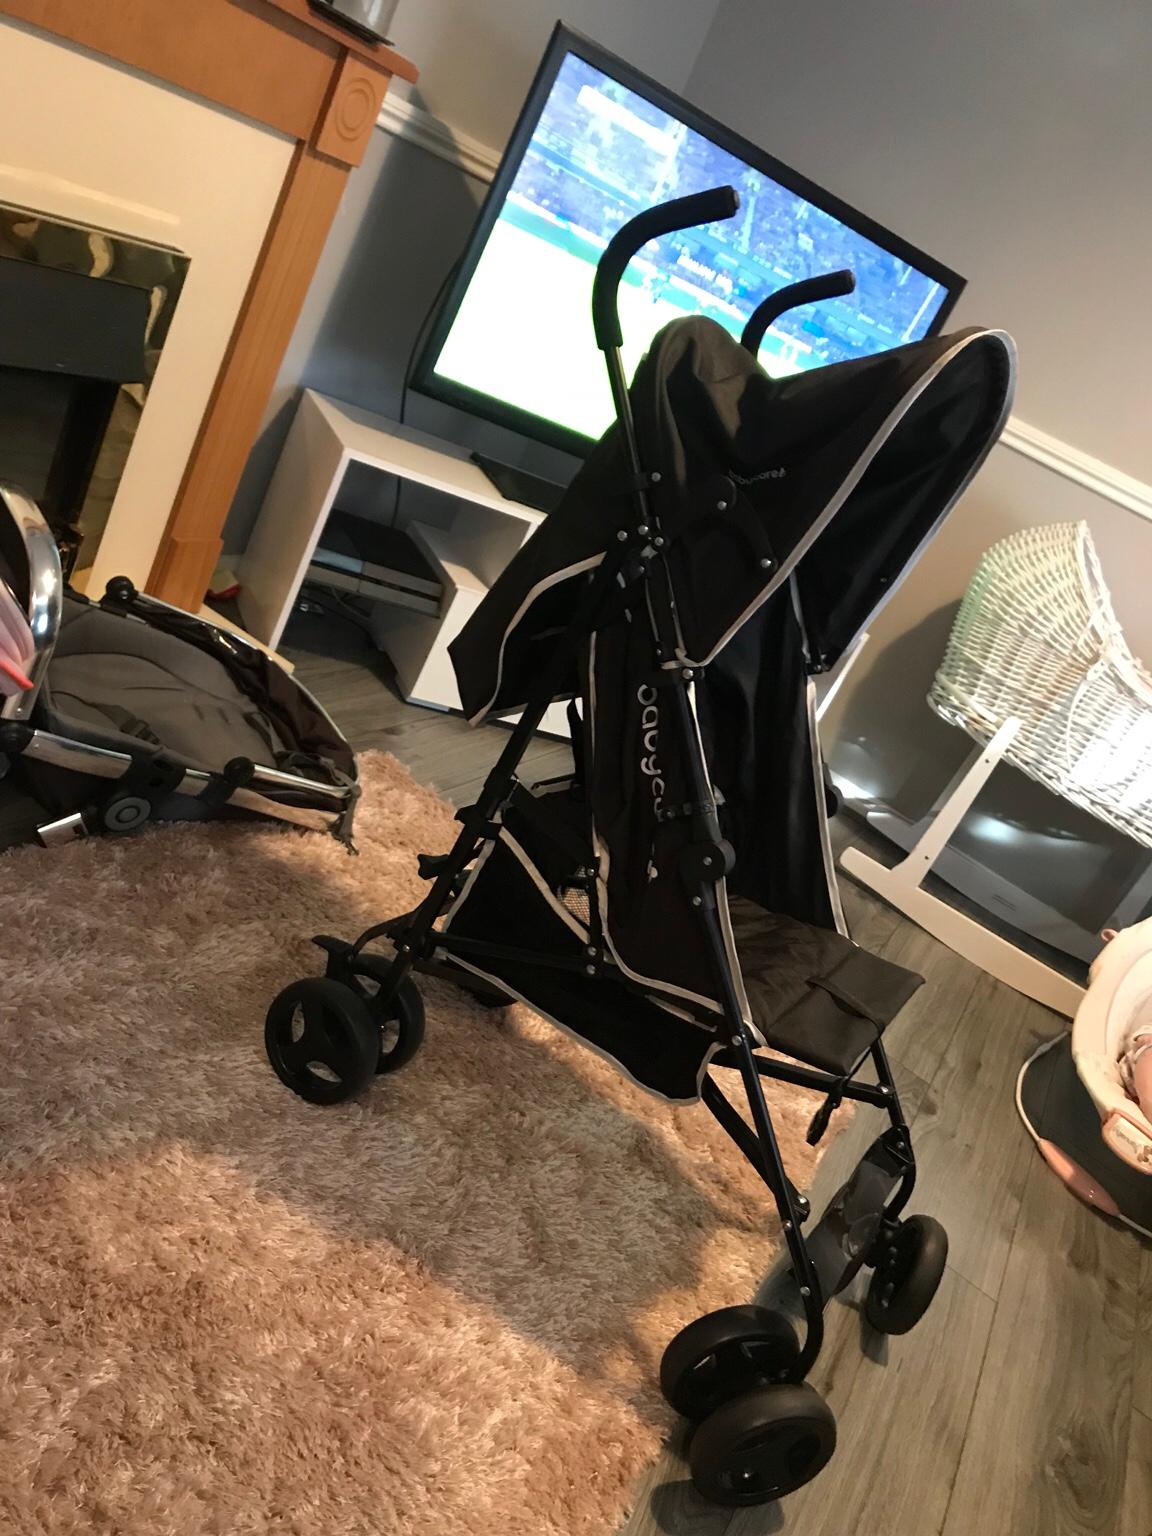 uppababy configurations 2017